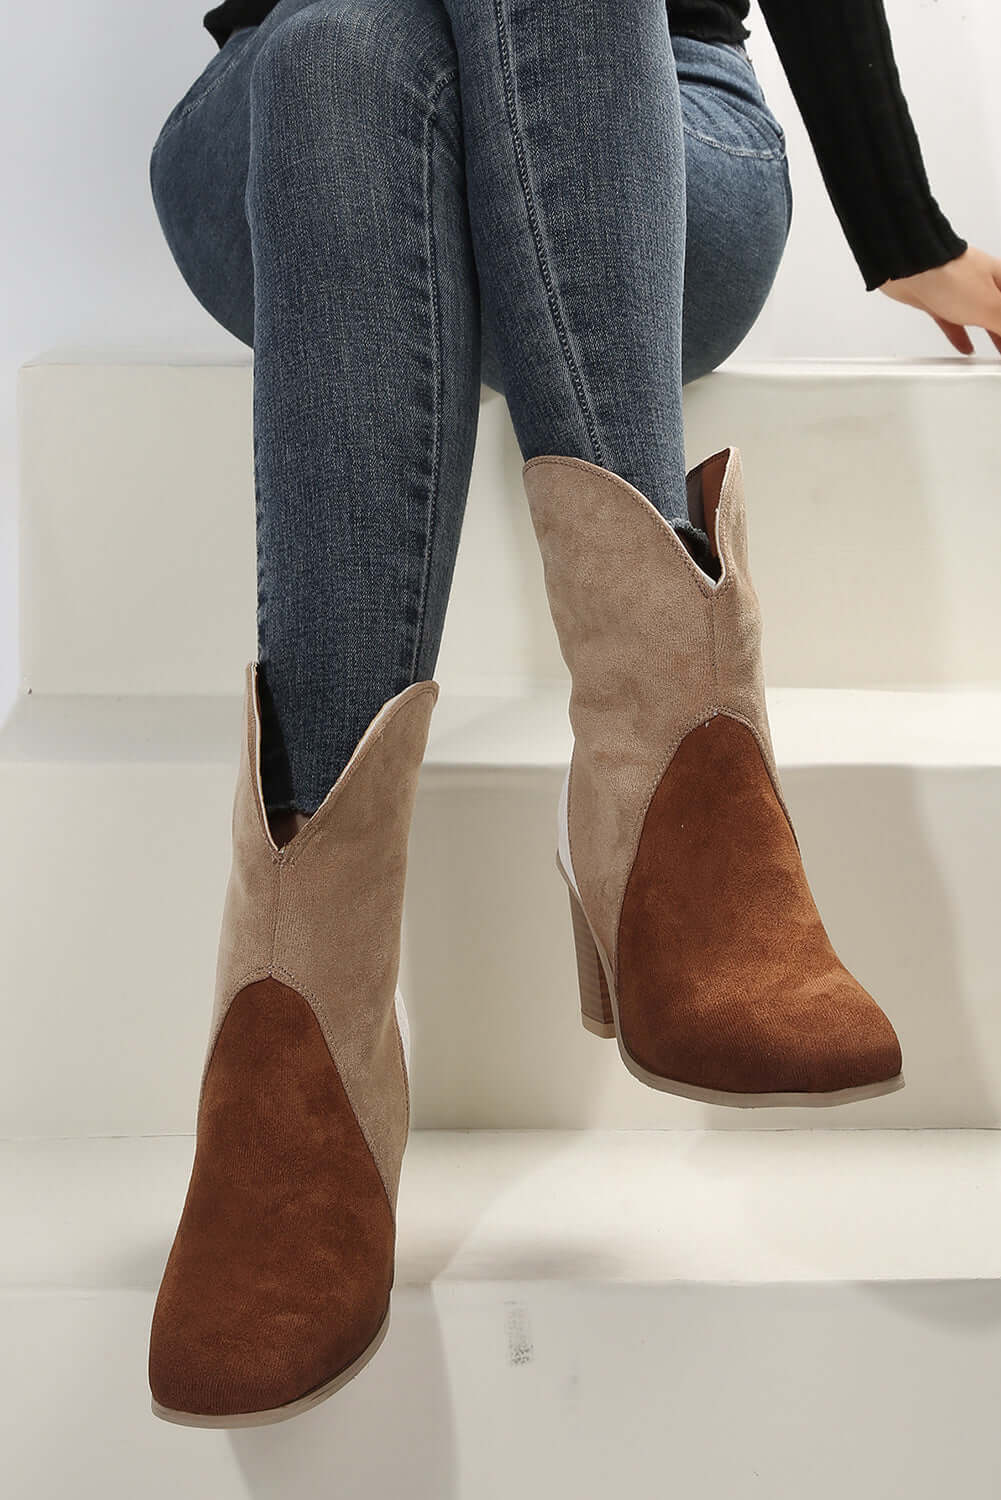 Chestnut Colorblock Suede Heeled Ankle Booties - Dixie Hike & Style